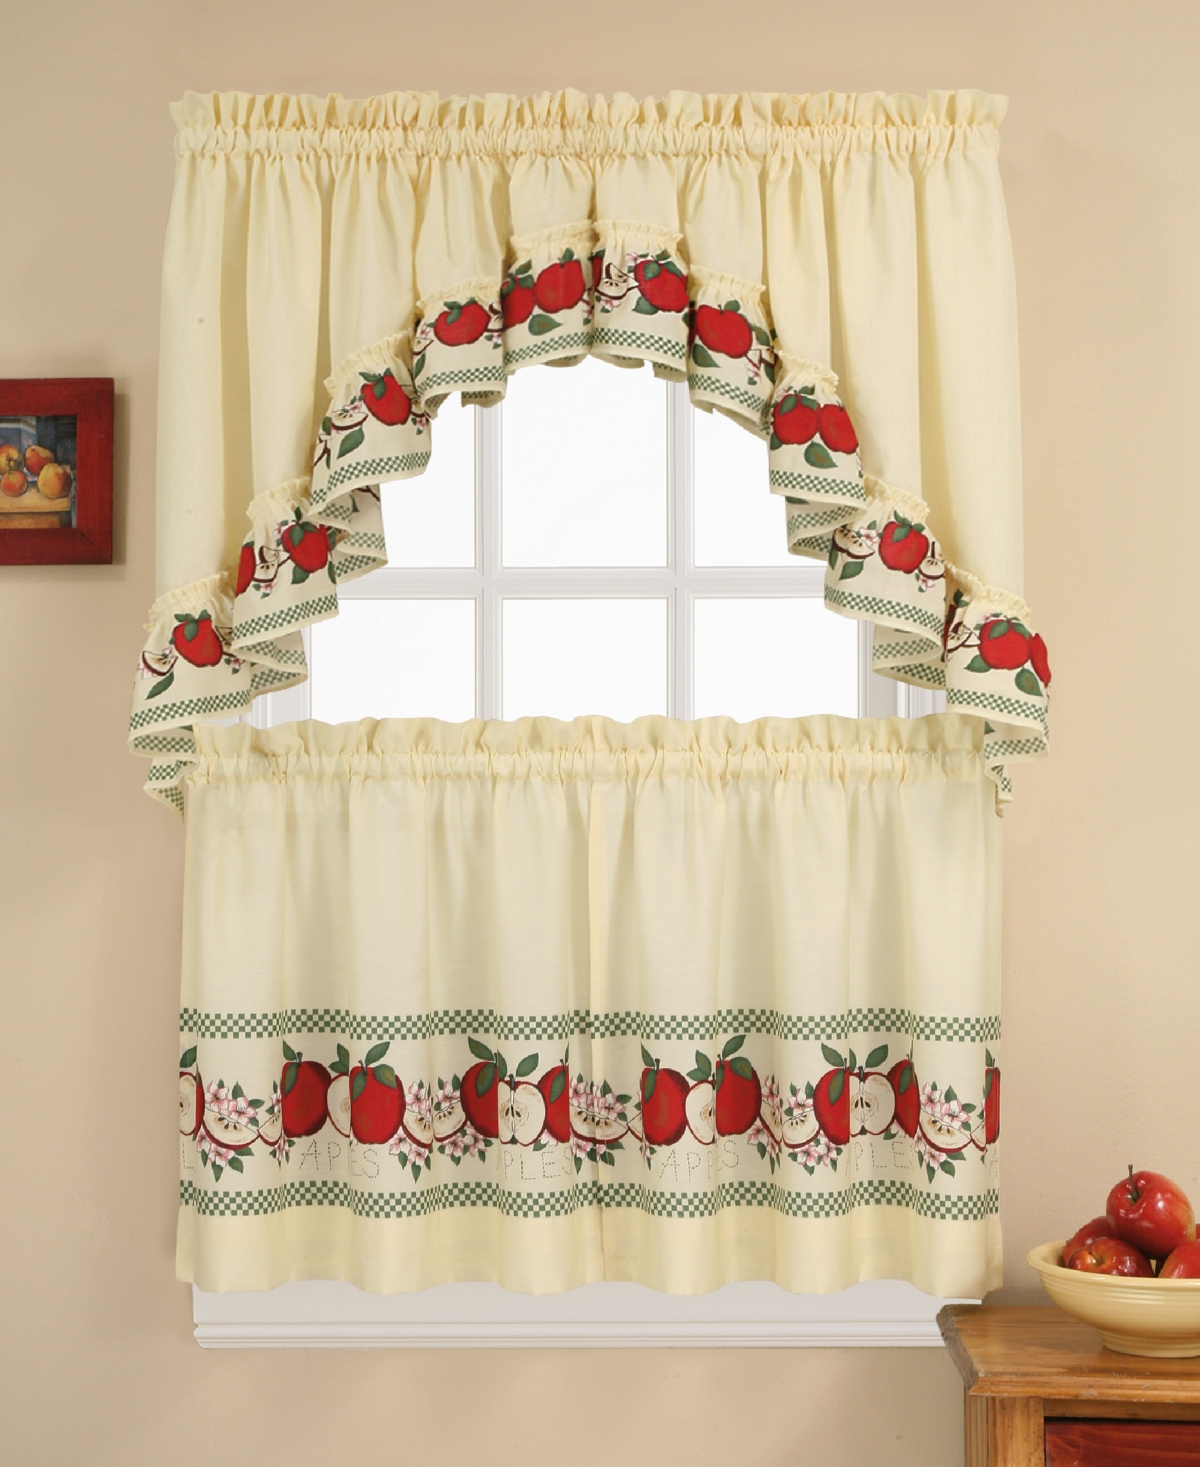 Red Delicious 24" Window Tier & Swag Valance Set - Multi